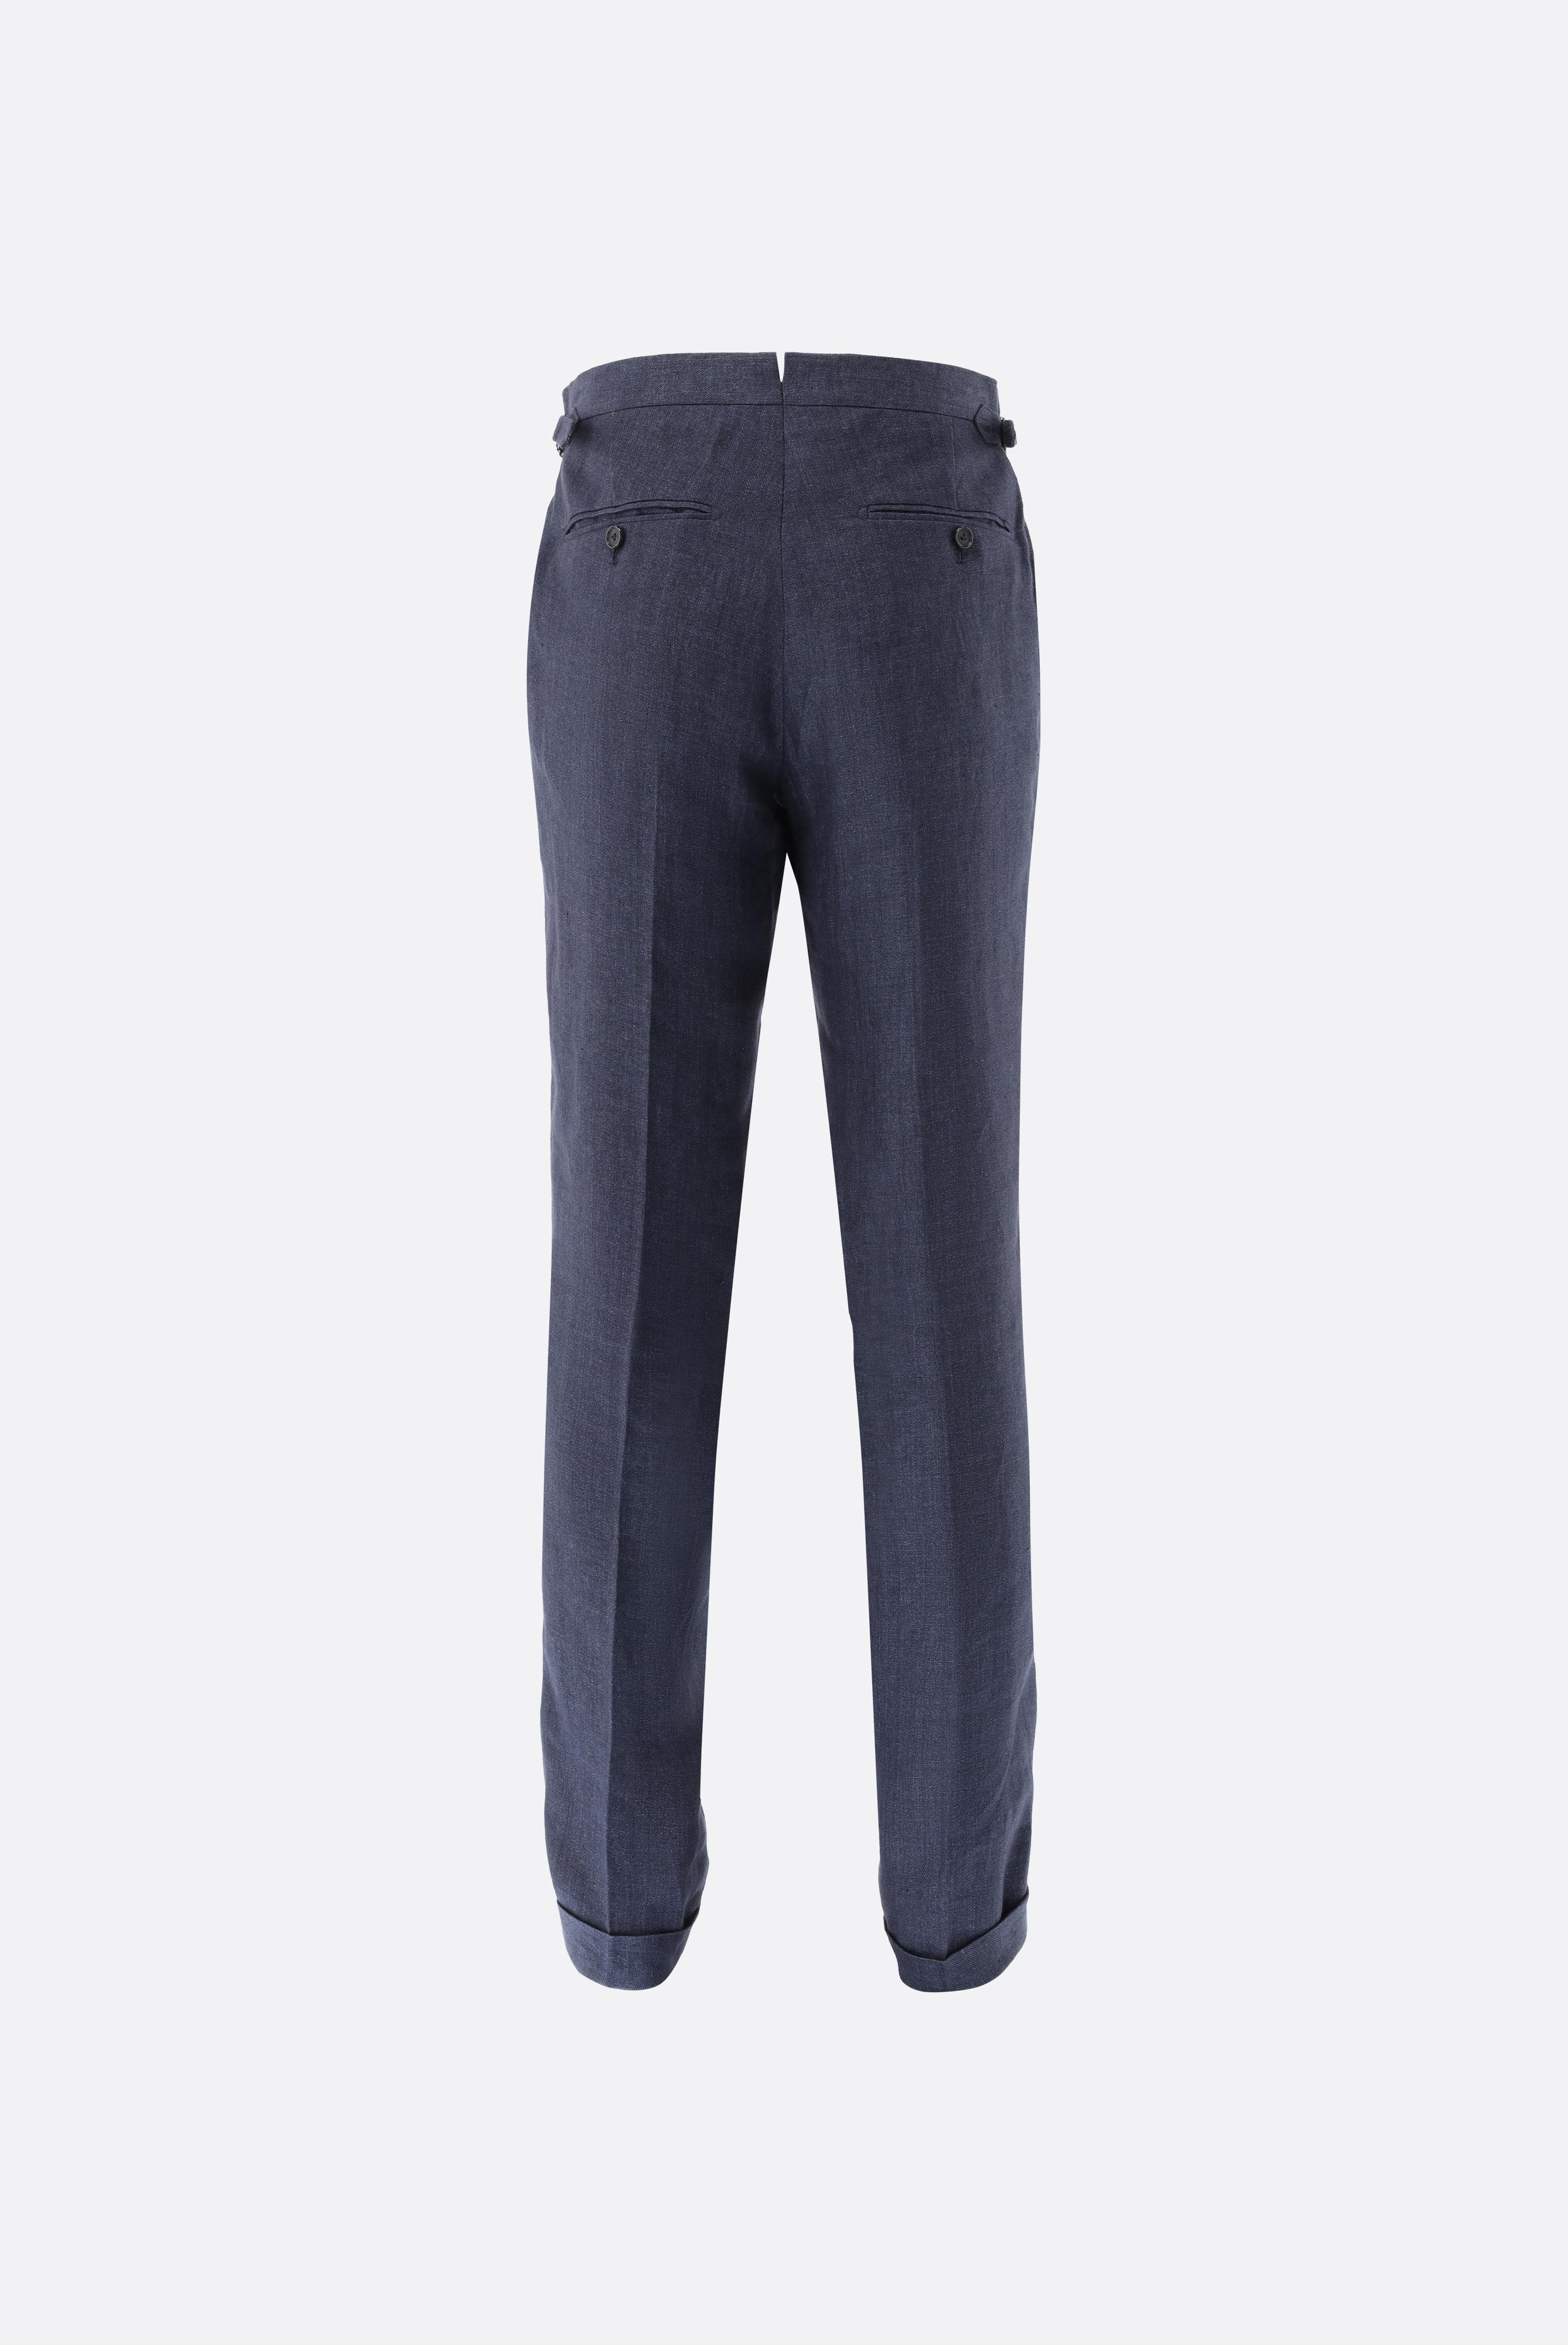 Jeans & Trousers+Linen trousers with pleats+20.7814.15.H55027.790.46